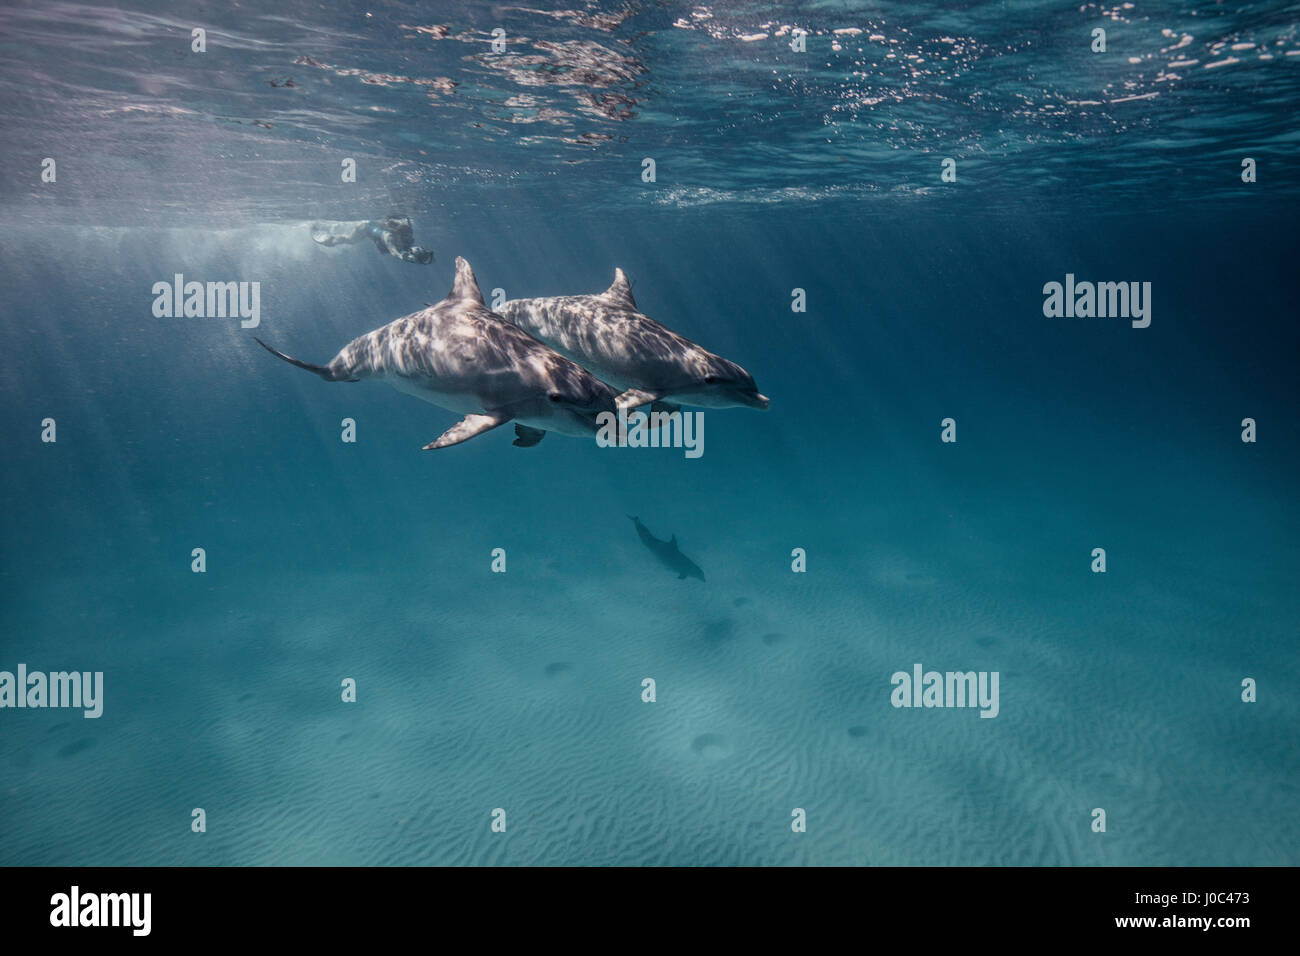 Underwater view of scuba diver following dolphins Stock Photo